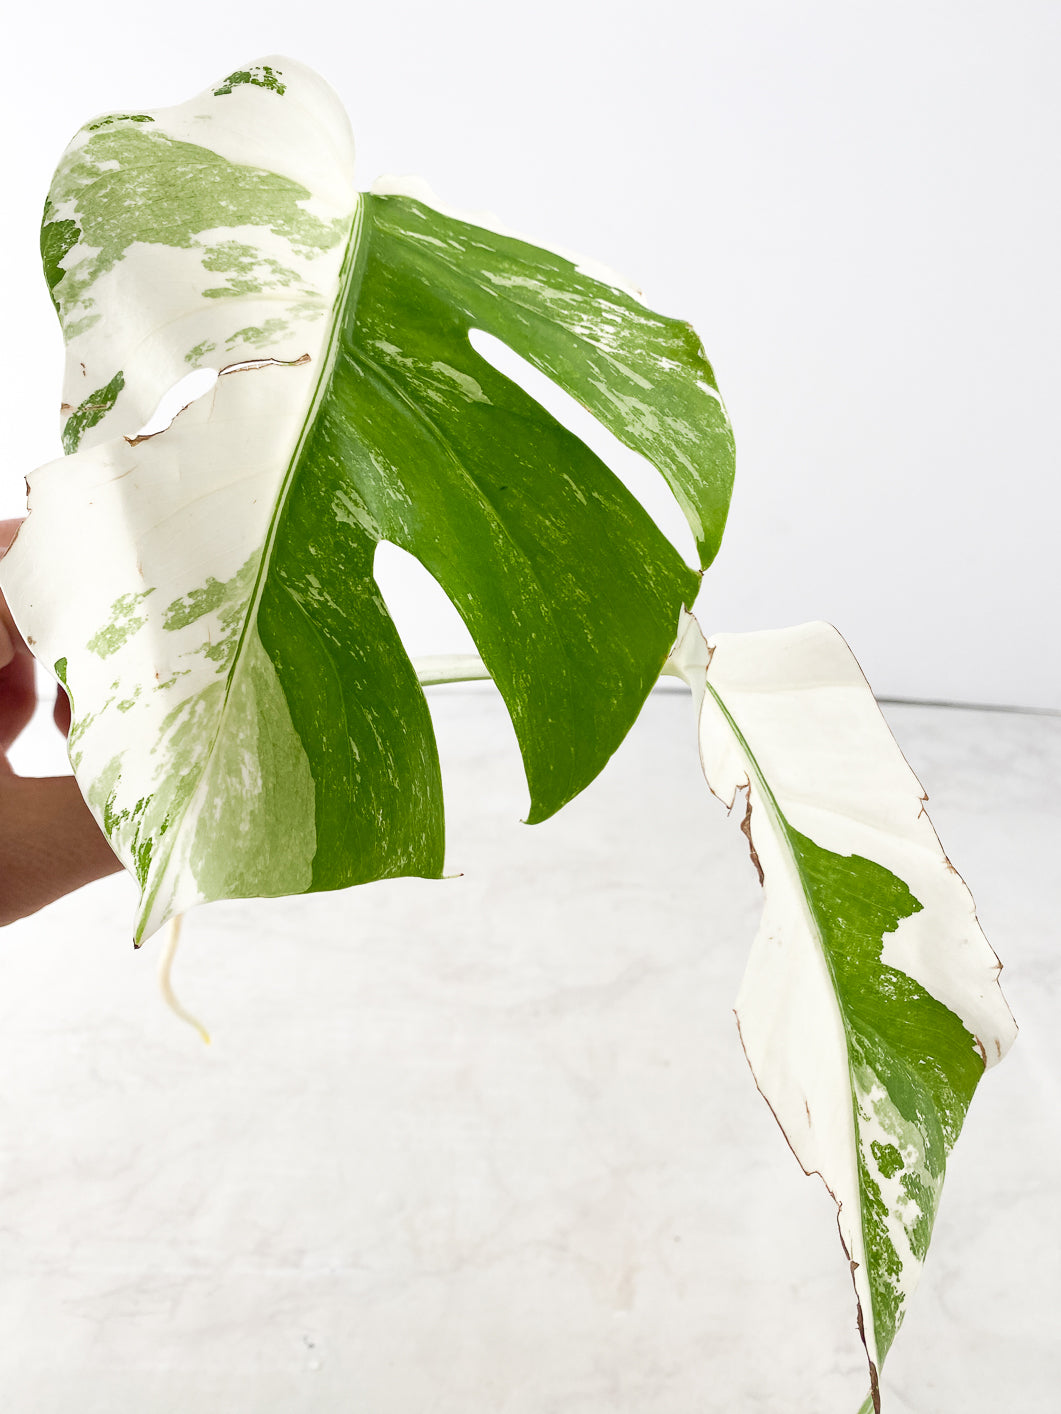 Monstera Albo White Tiger 2 leaves rooting top cutting